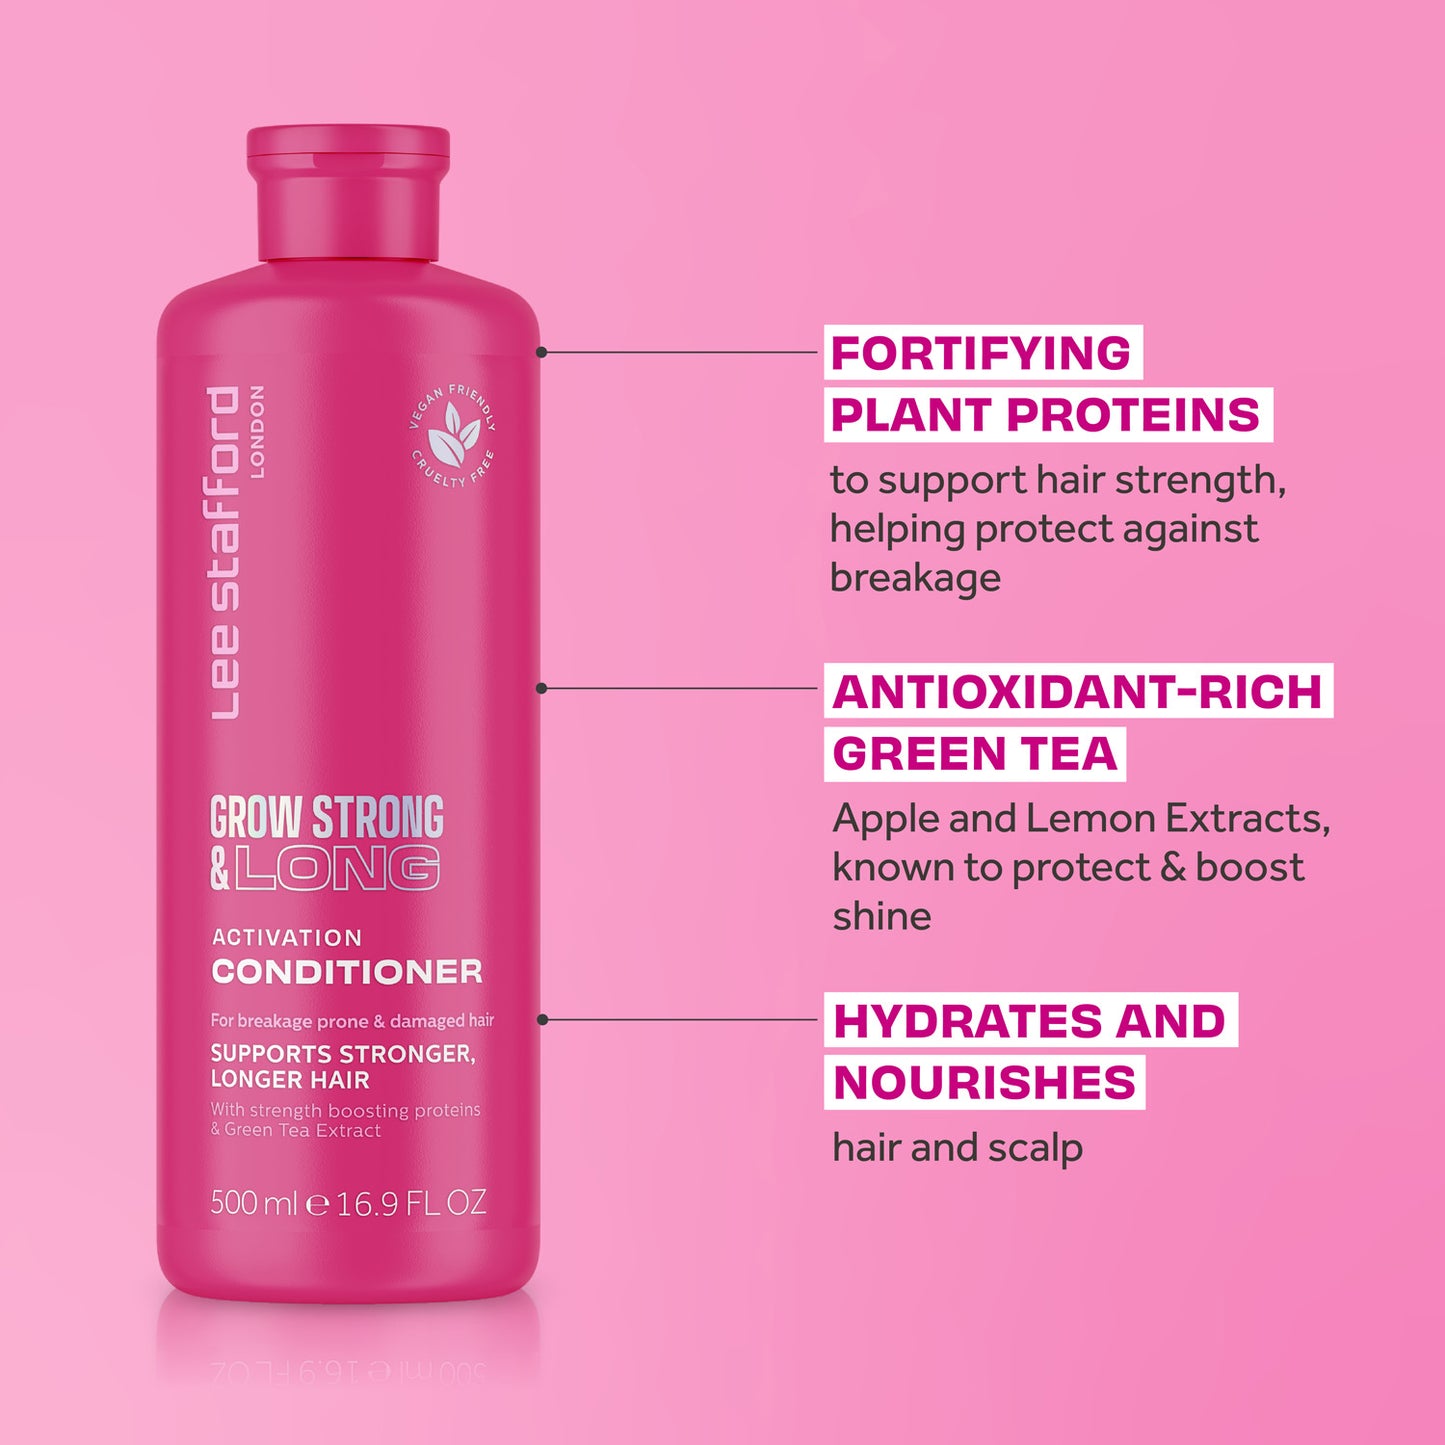 Grow Strong & Long Activation Conditioner